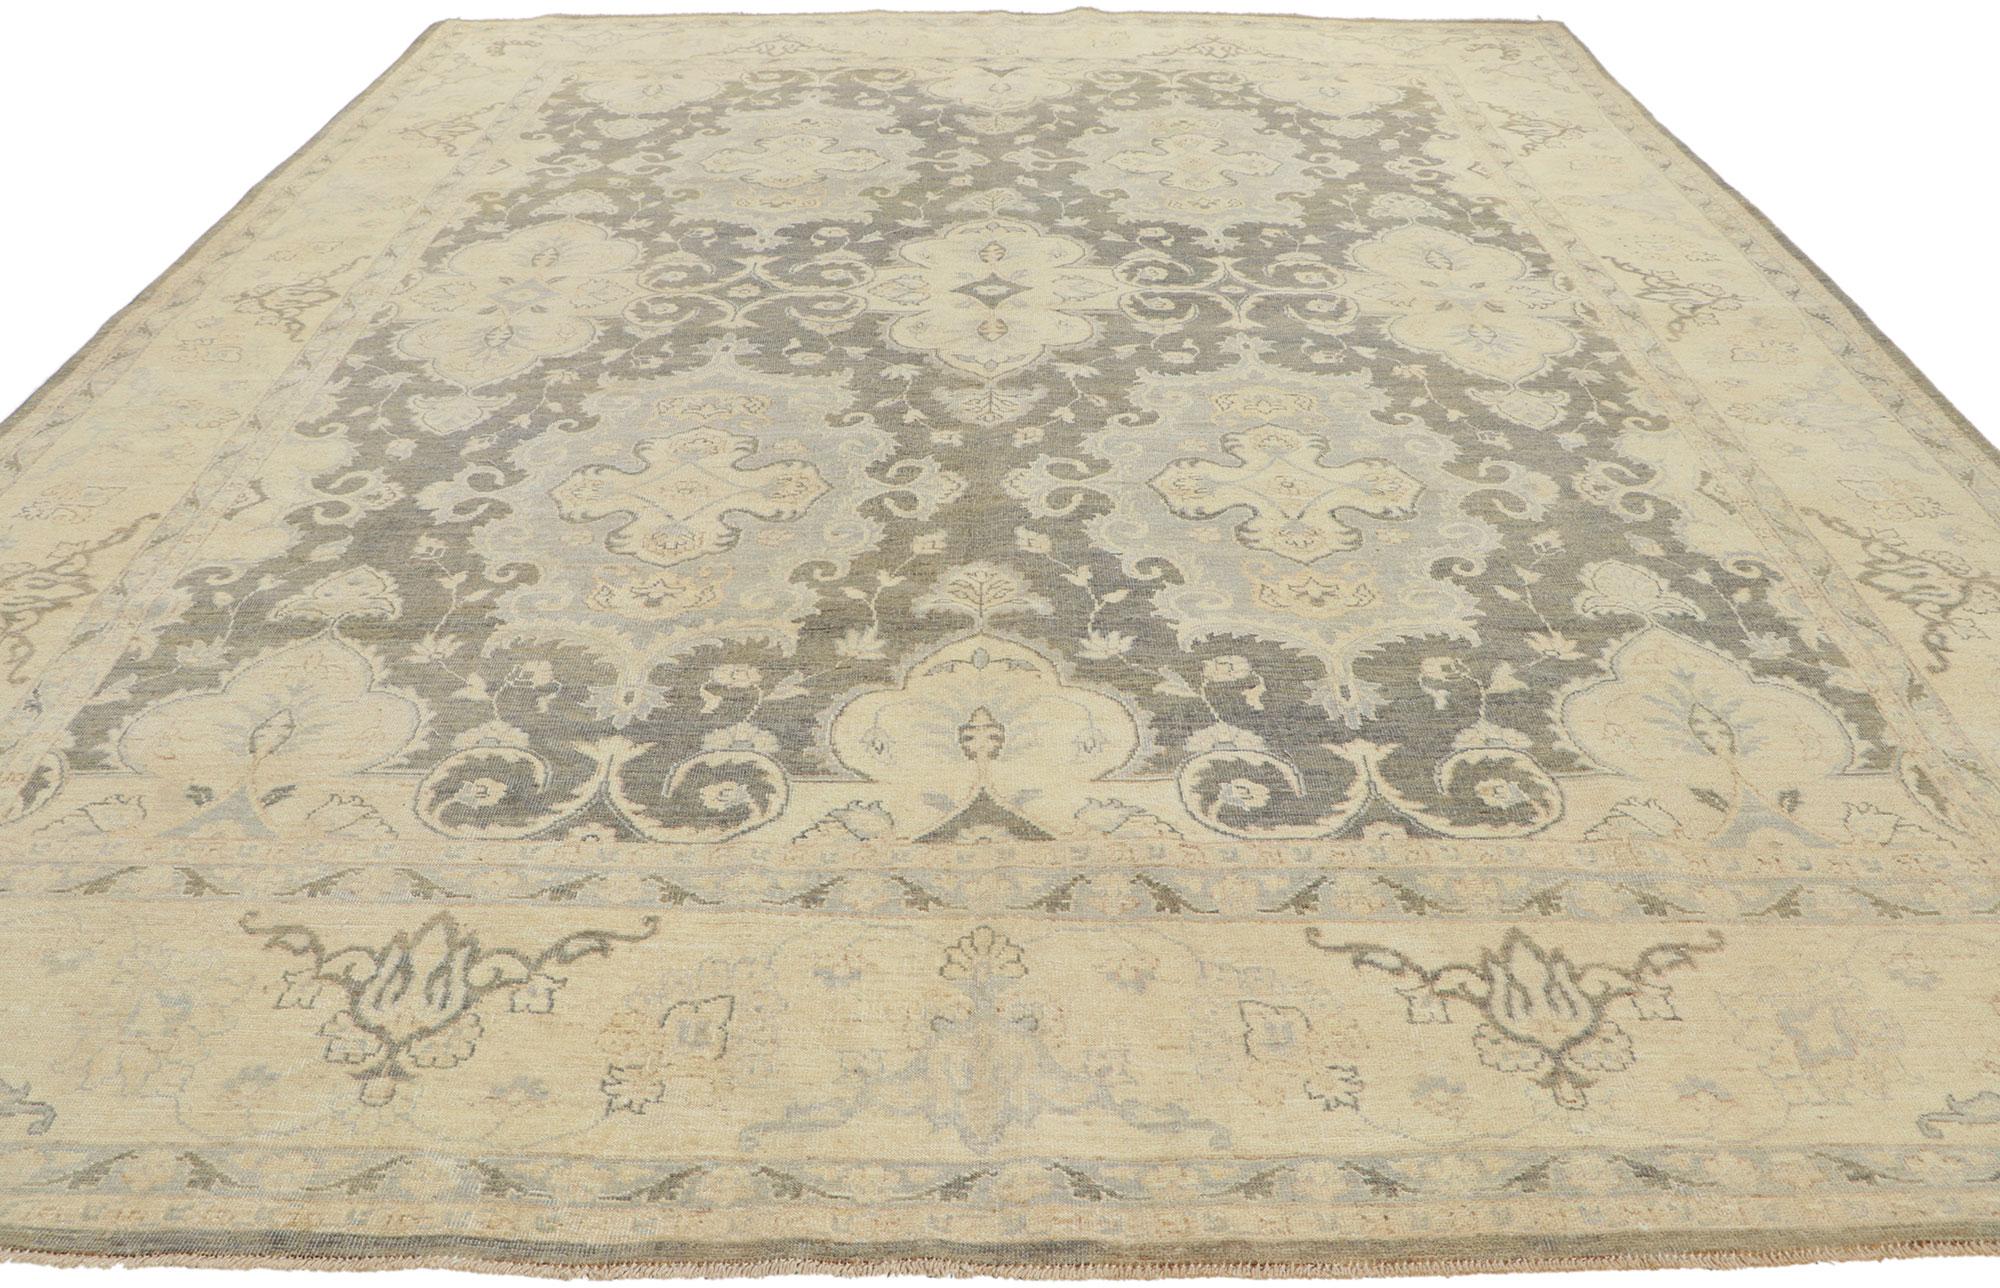 80940 New transitional area rug with modern style.
Serene and sophisticated, this hand knotted wool transitional rug beautifully embodies a modern style. The composition features an all-over botanical pattern composed of amorphous organic motifs